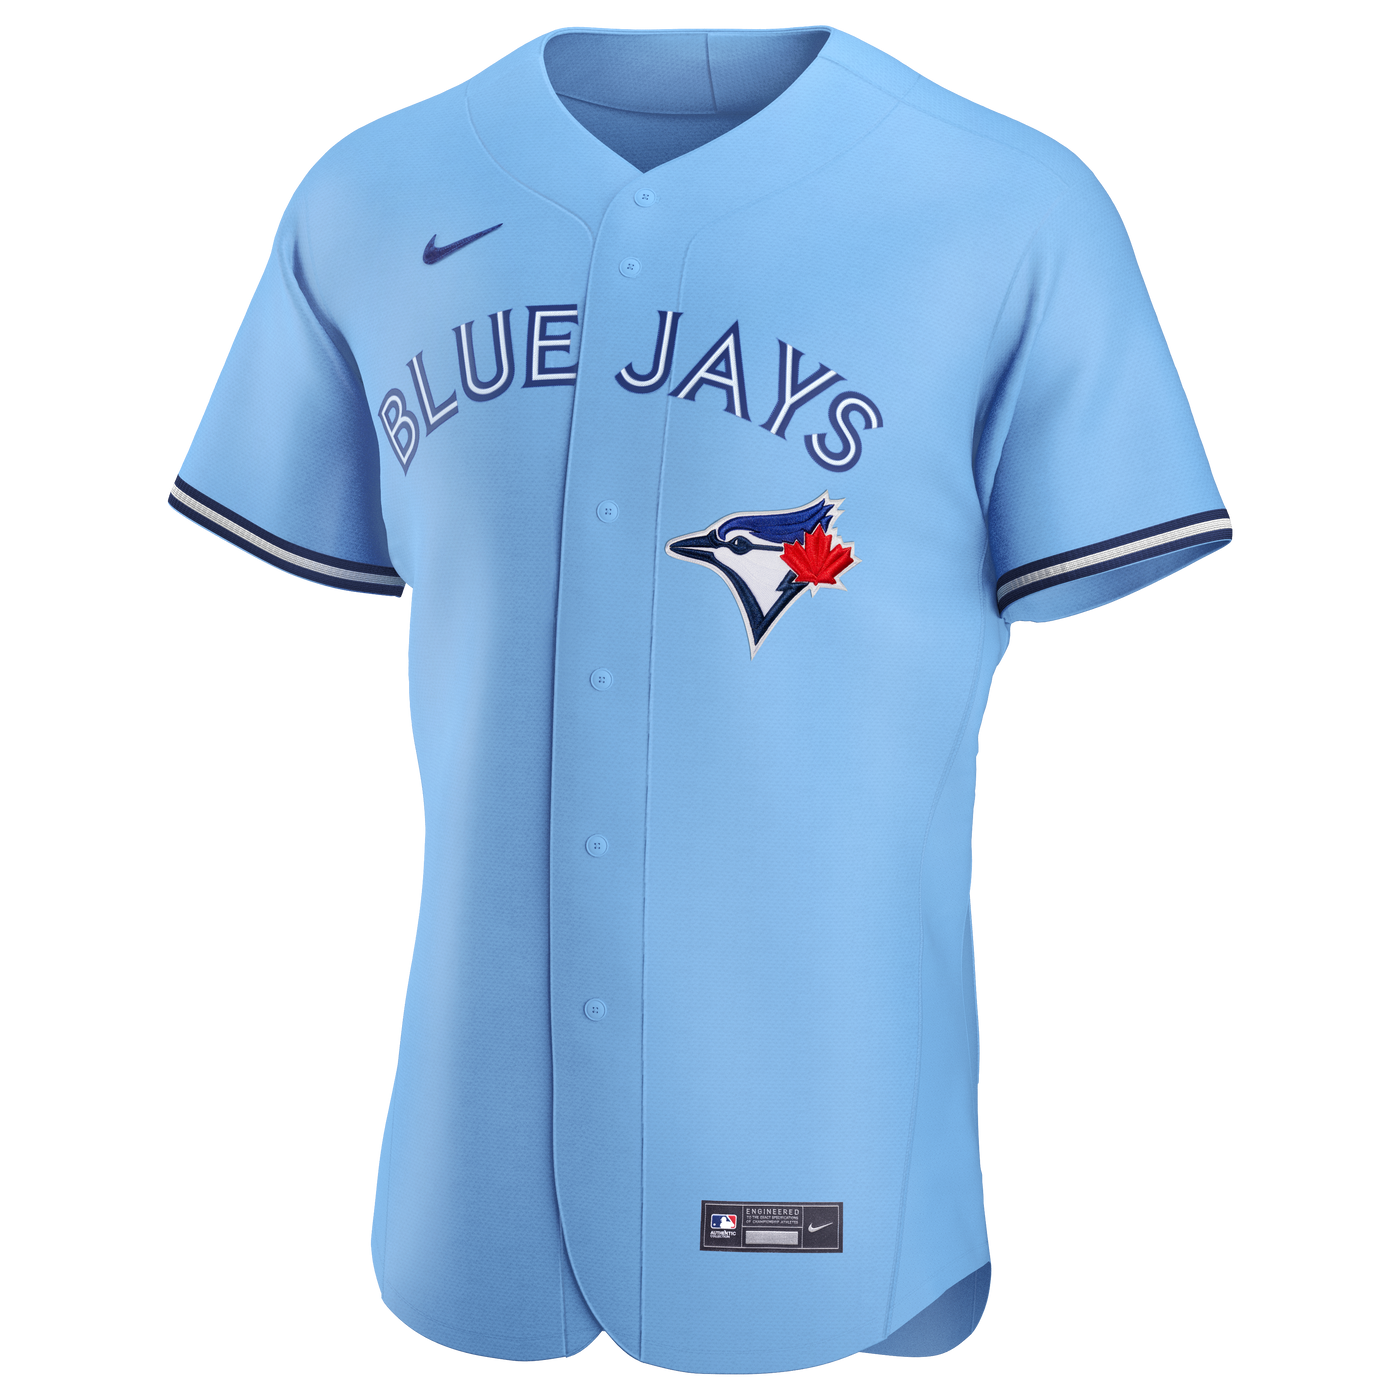 Toronto Blue Jays Nike Official Replica Road Jersey - Youth